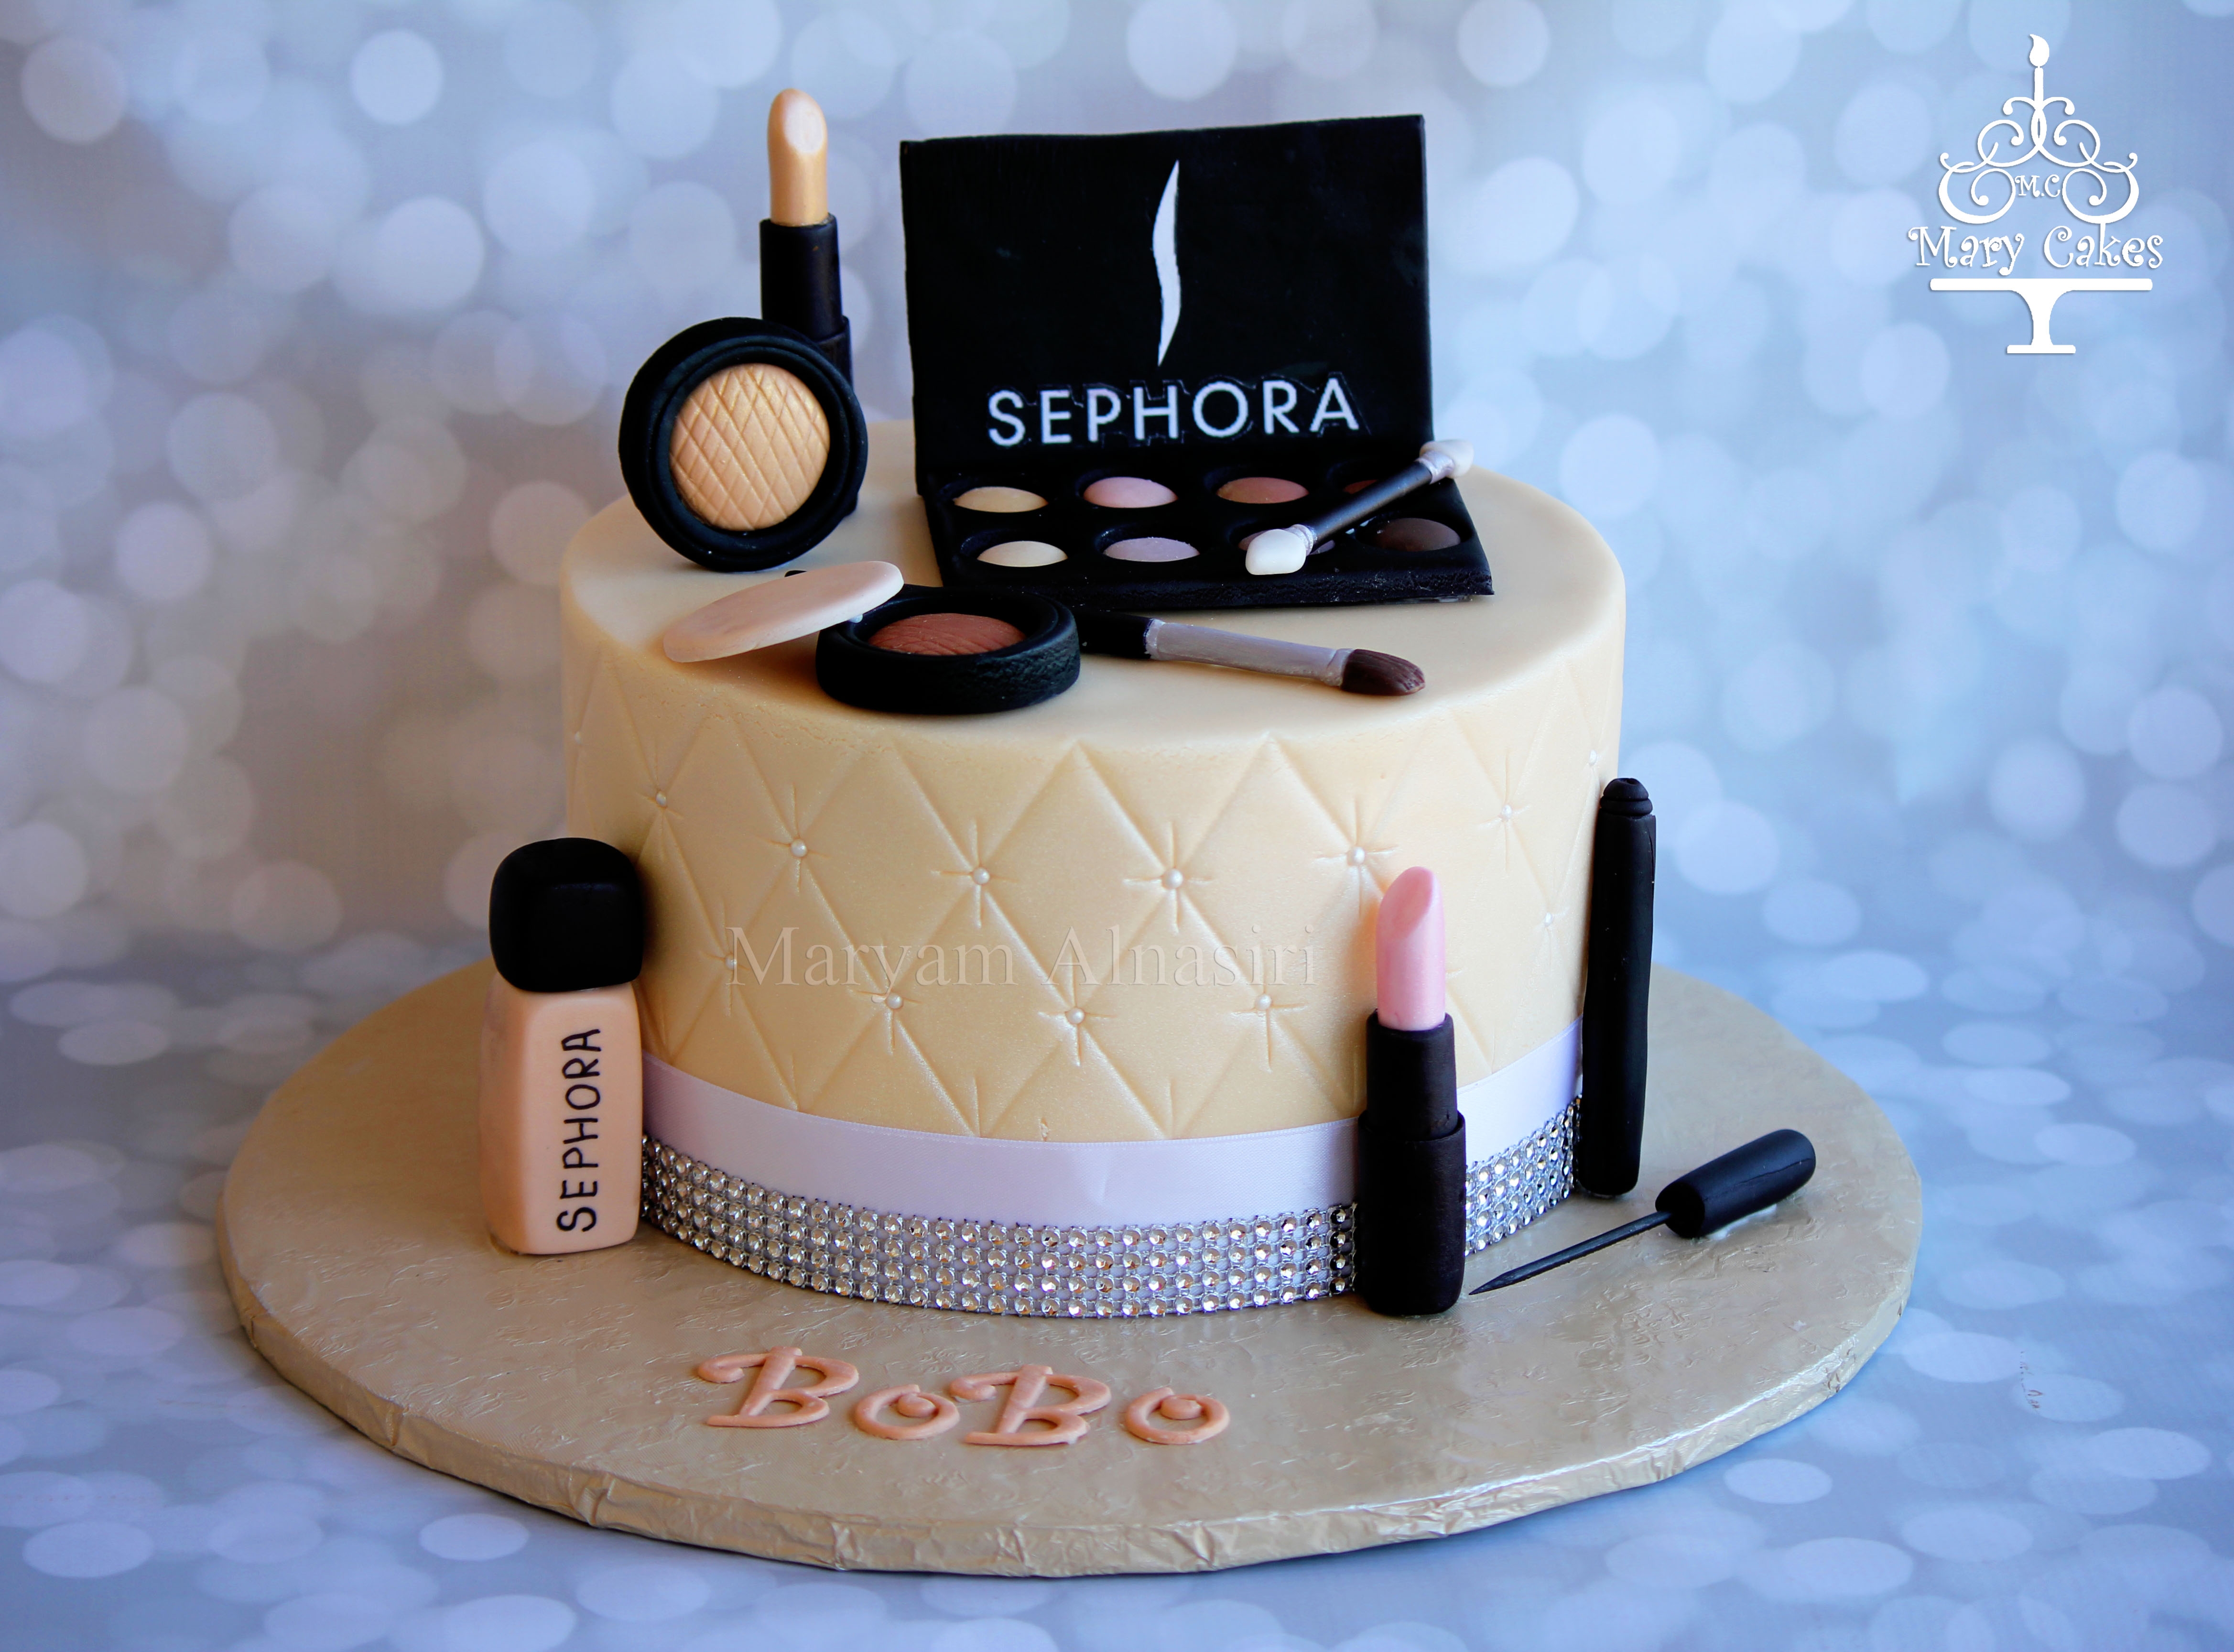 cake ideas for makeup lovers